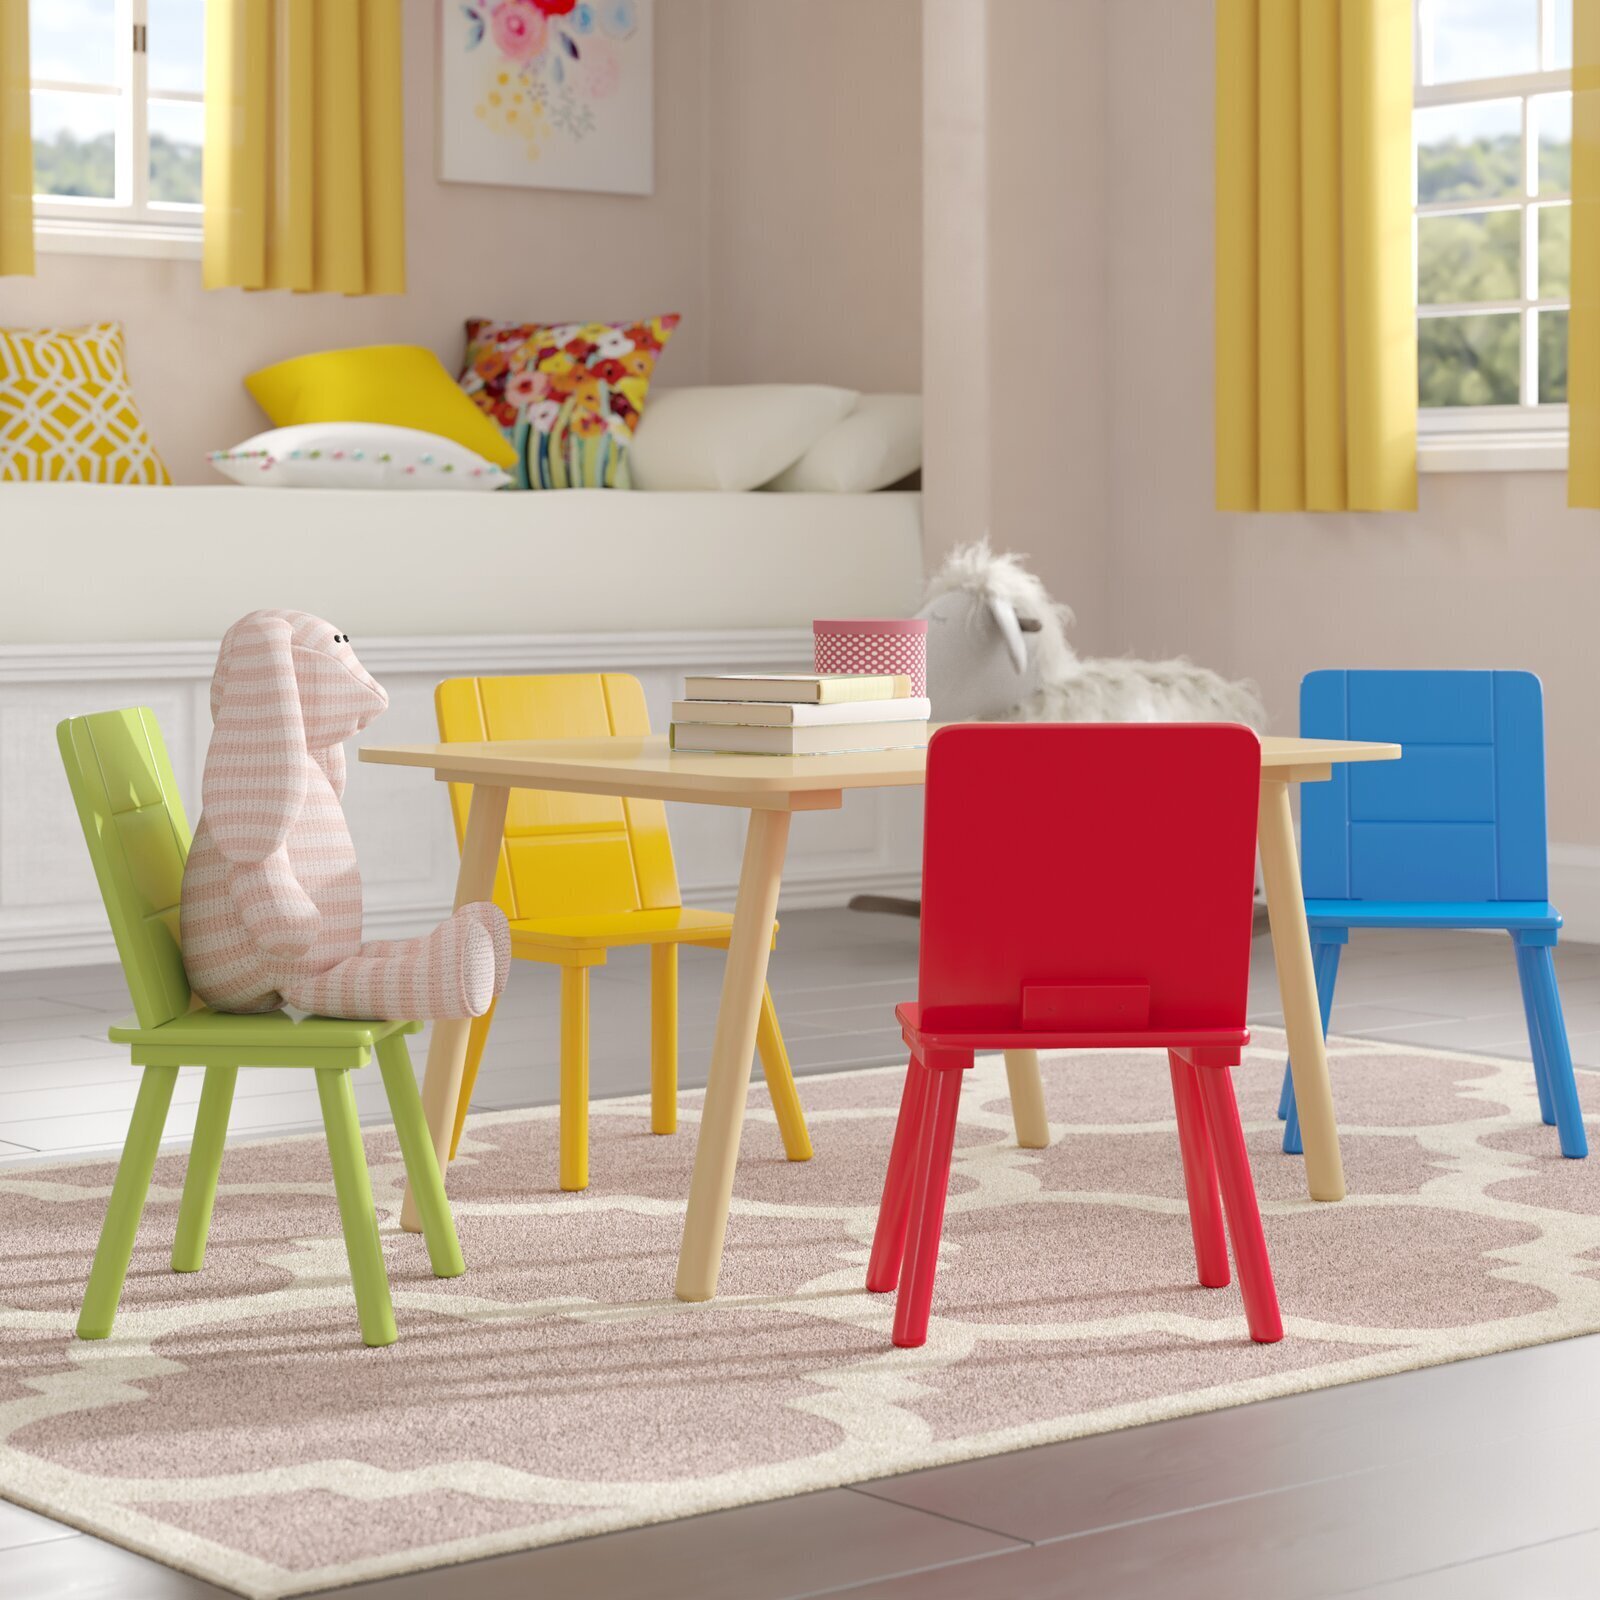 Blue, Red Max & Lily Natural Wood Kid and Toddler Rectangular Table Chairs 